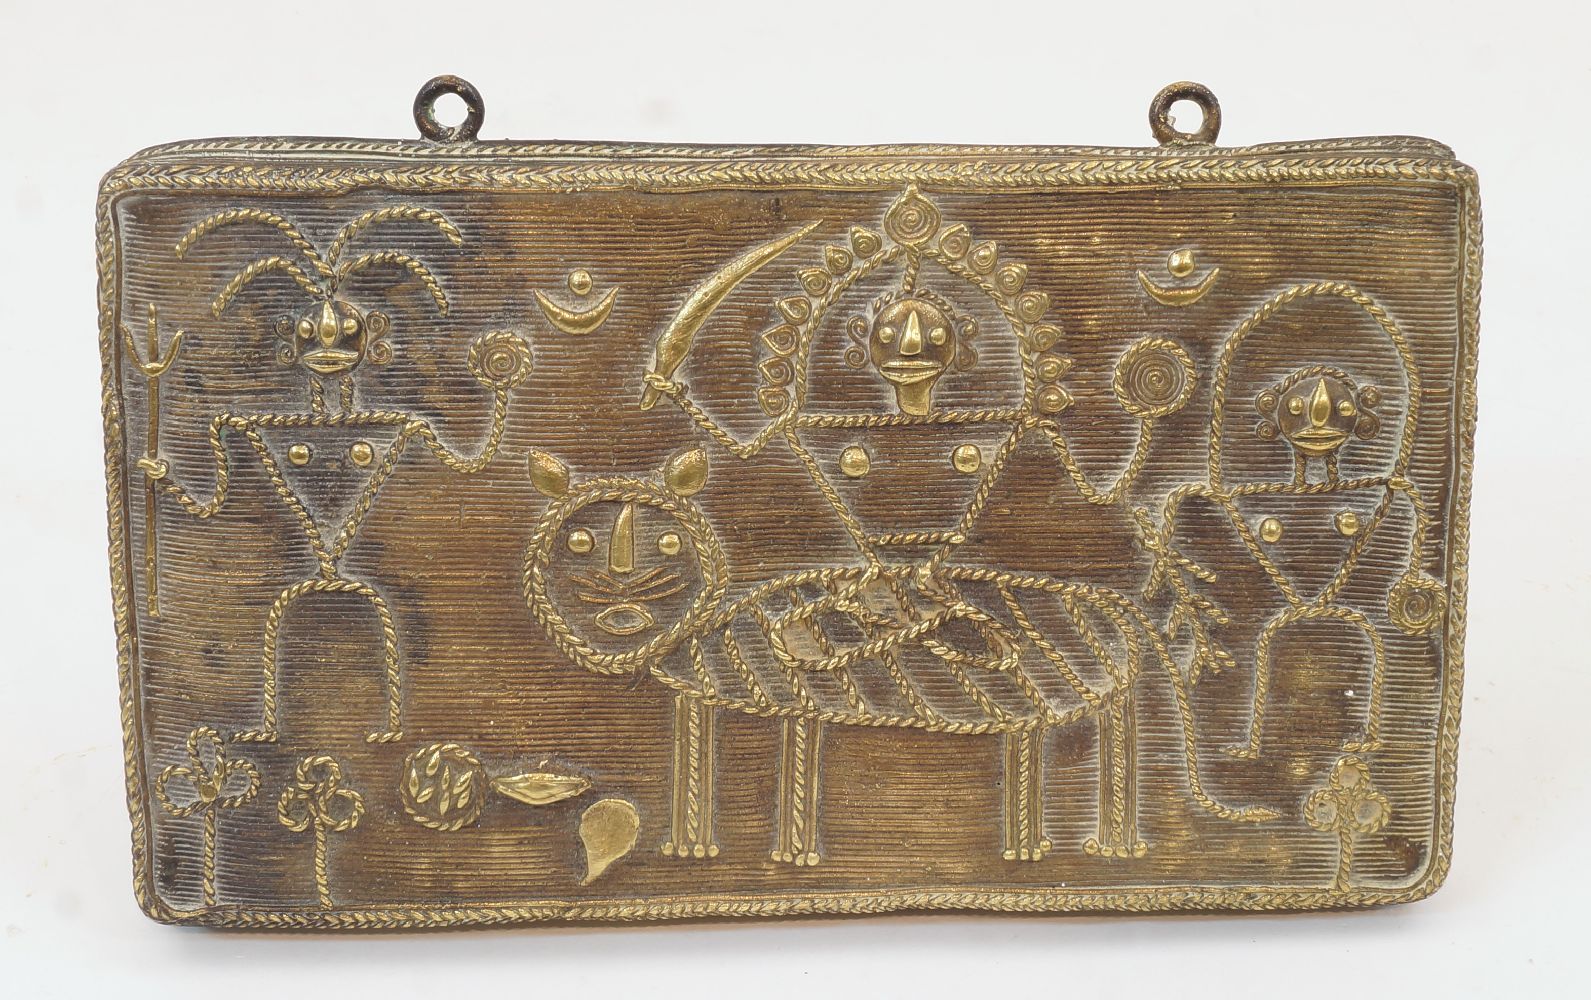 An Indian gilt-brass plaque, late 19th / early century, depicting the Goddess Durga riding a tiger